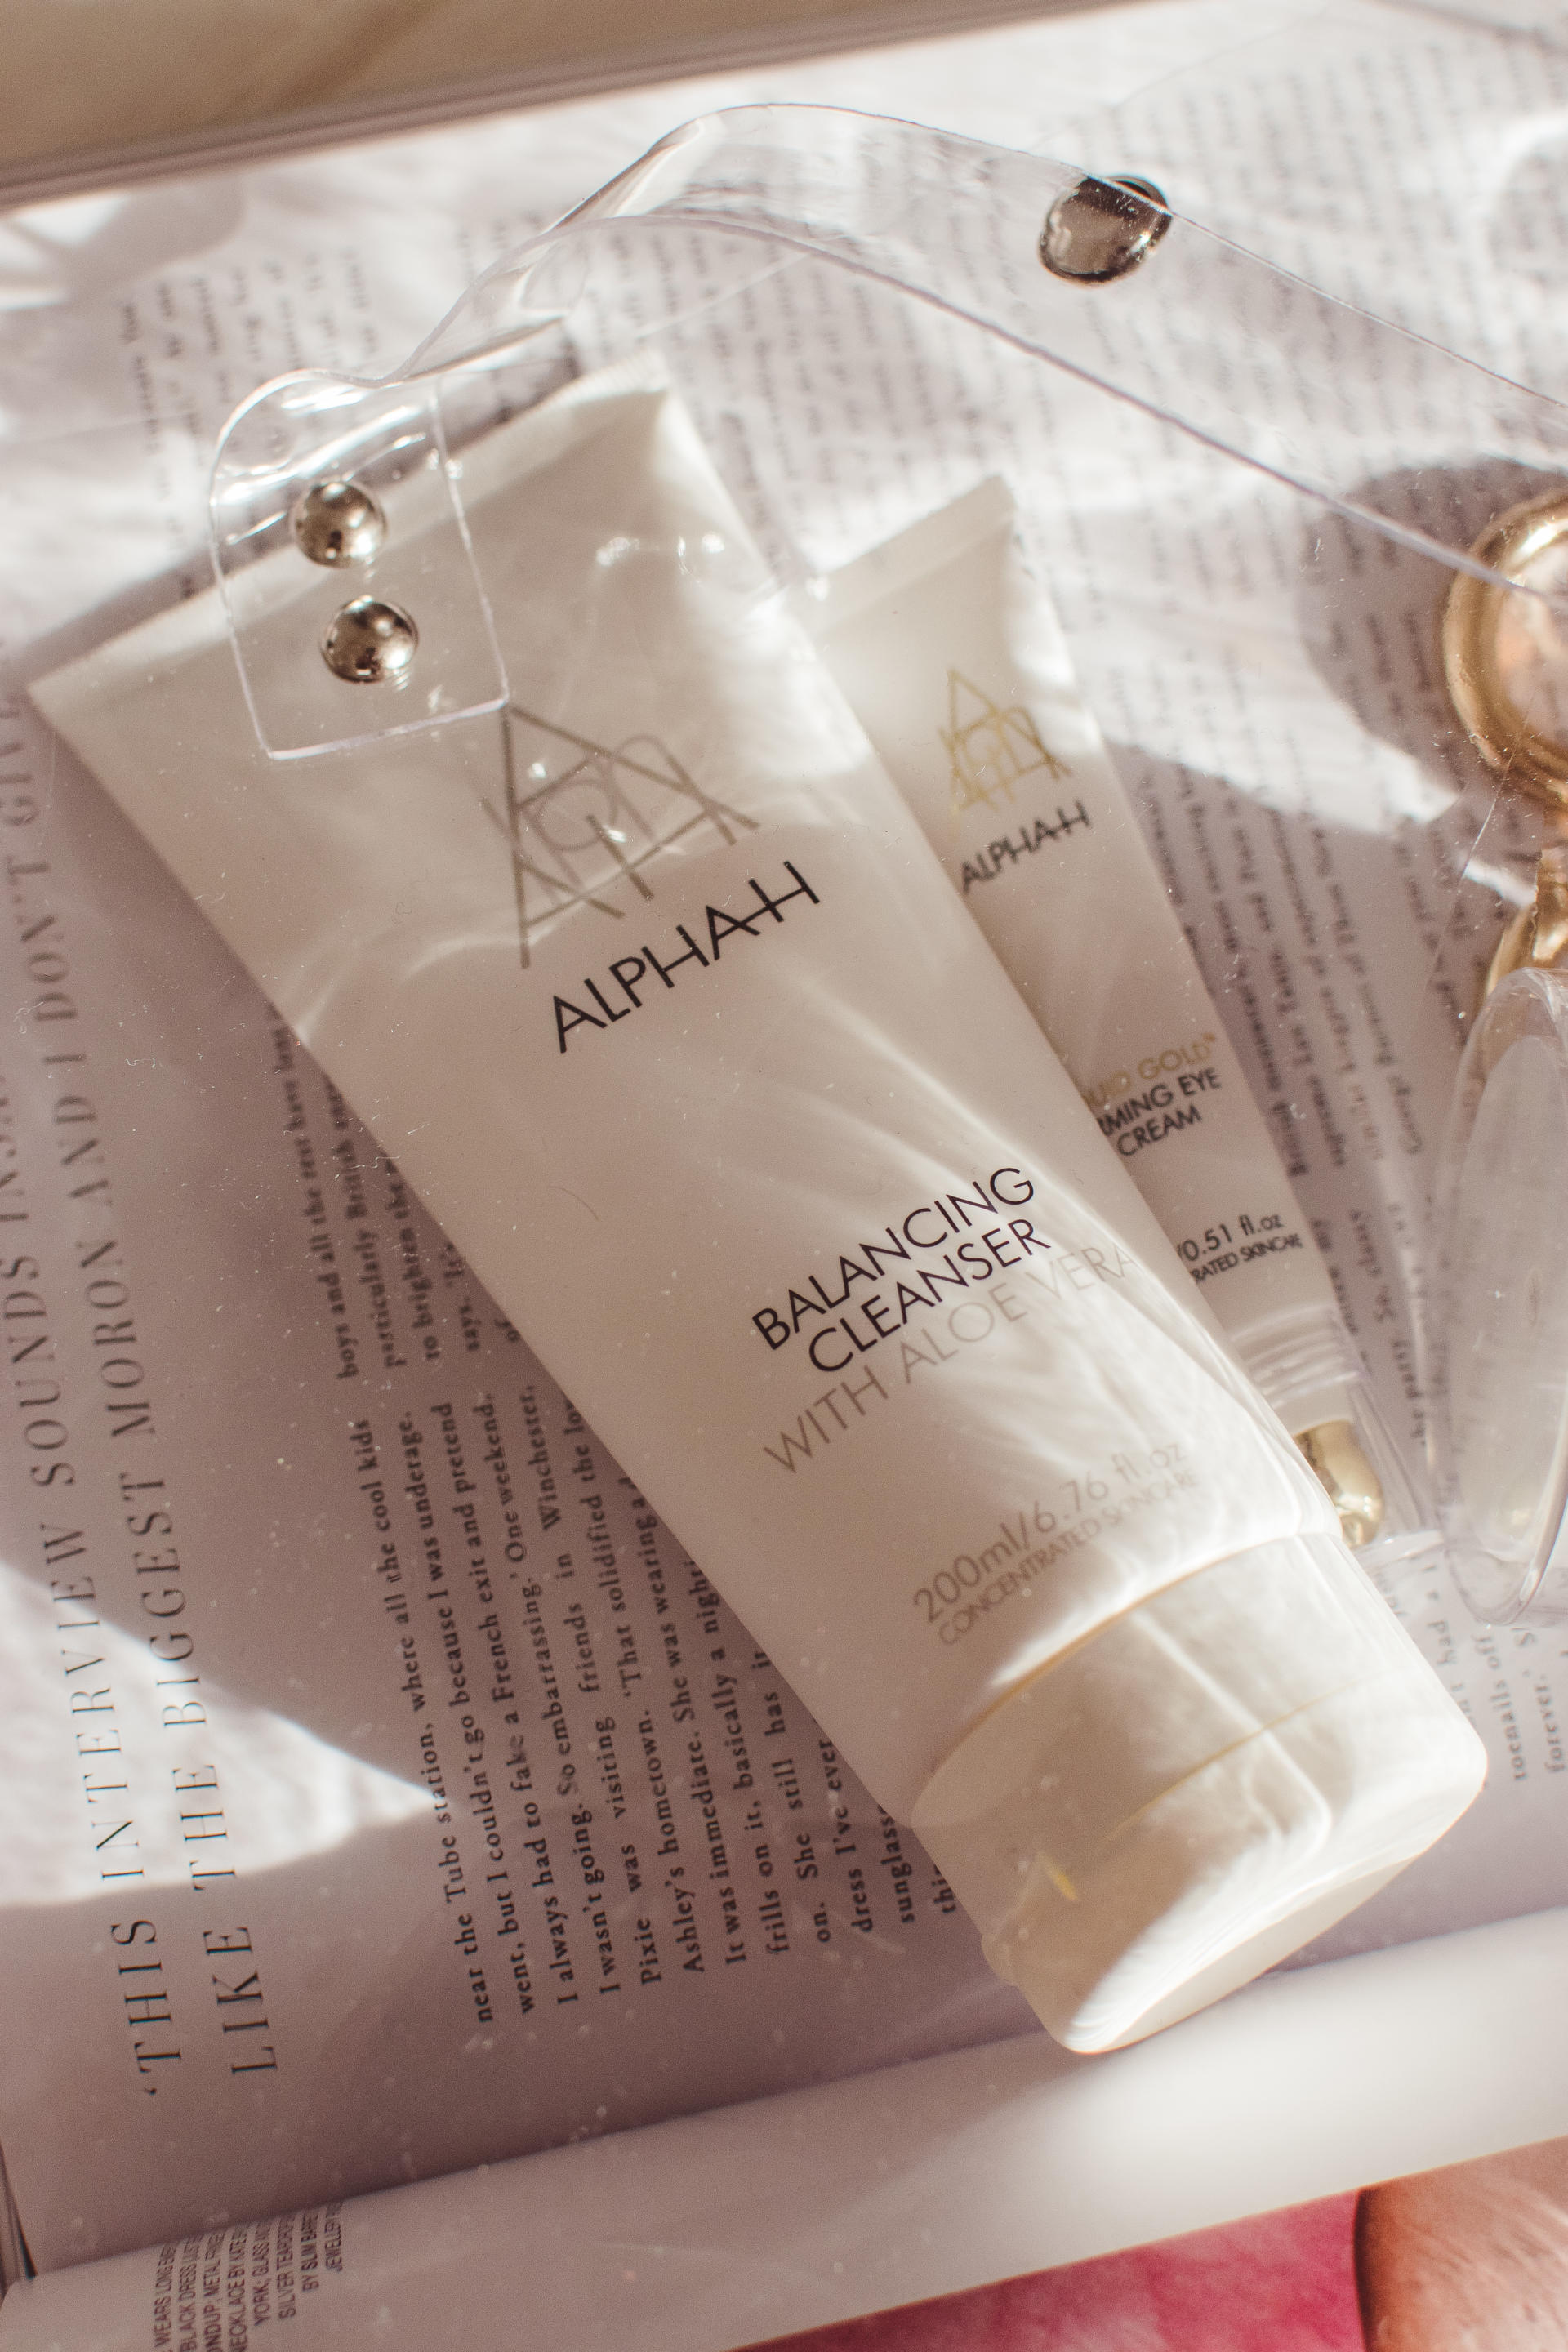 Alpha-H Balancing Cleanser ﻿Review